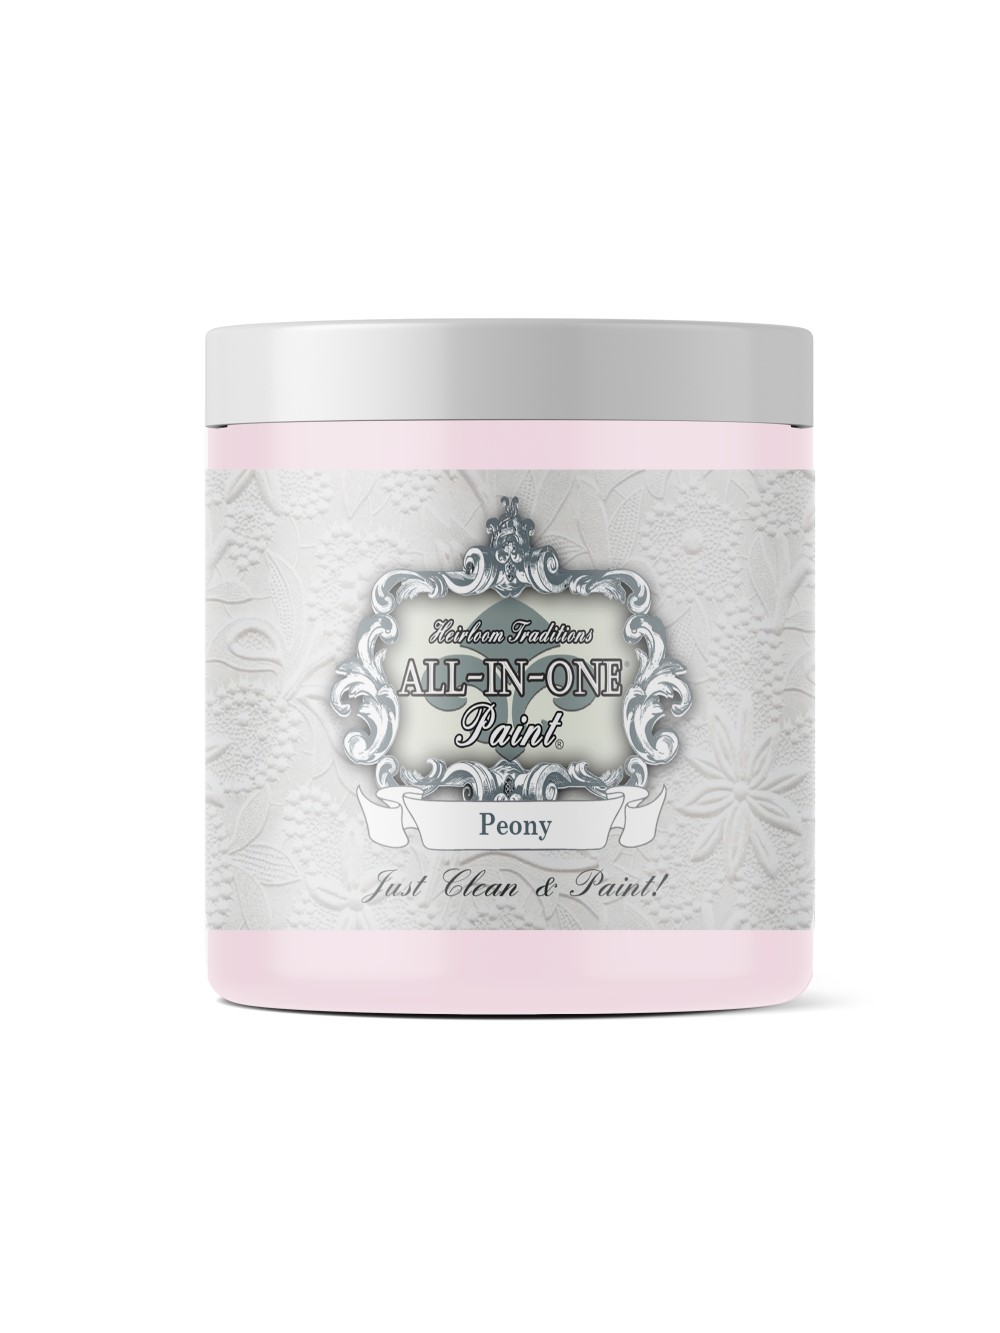 Heirloom Traditions Paint ALL-IN-ONE Paint, Peony (Pale Pink), 8 Fl Oz Sample